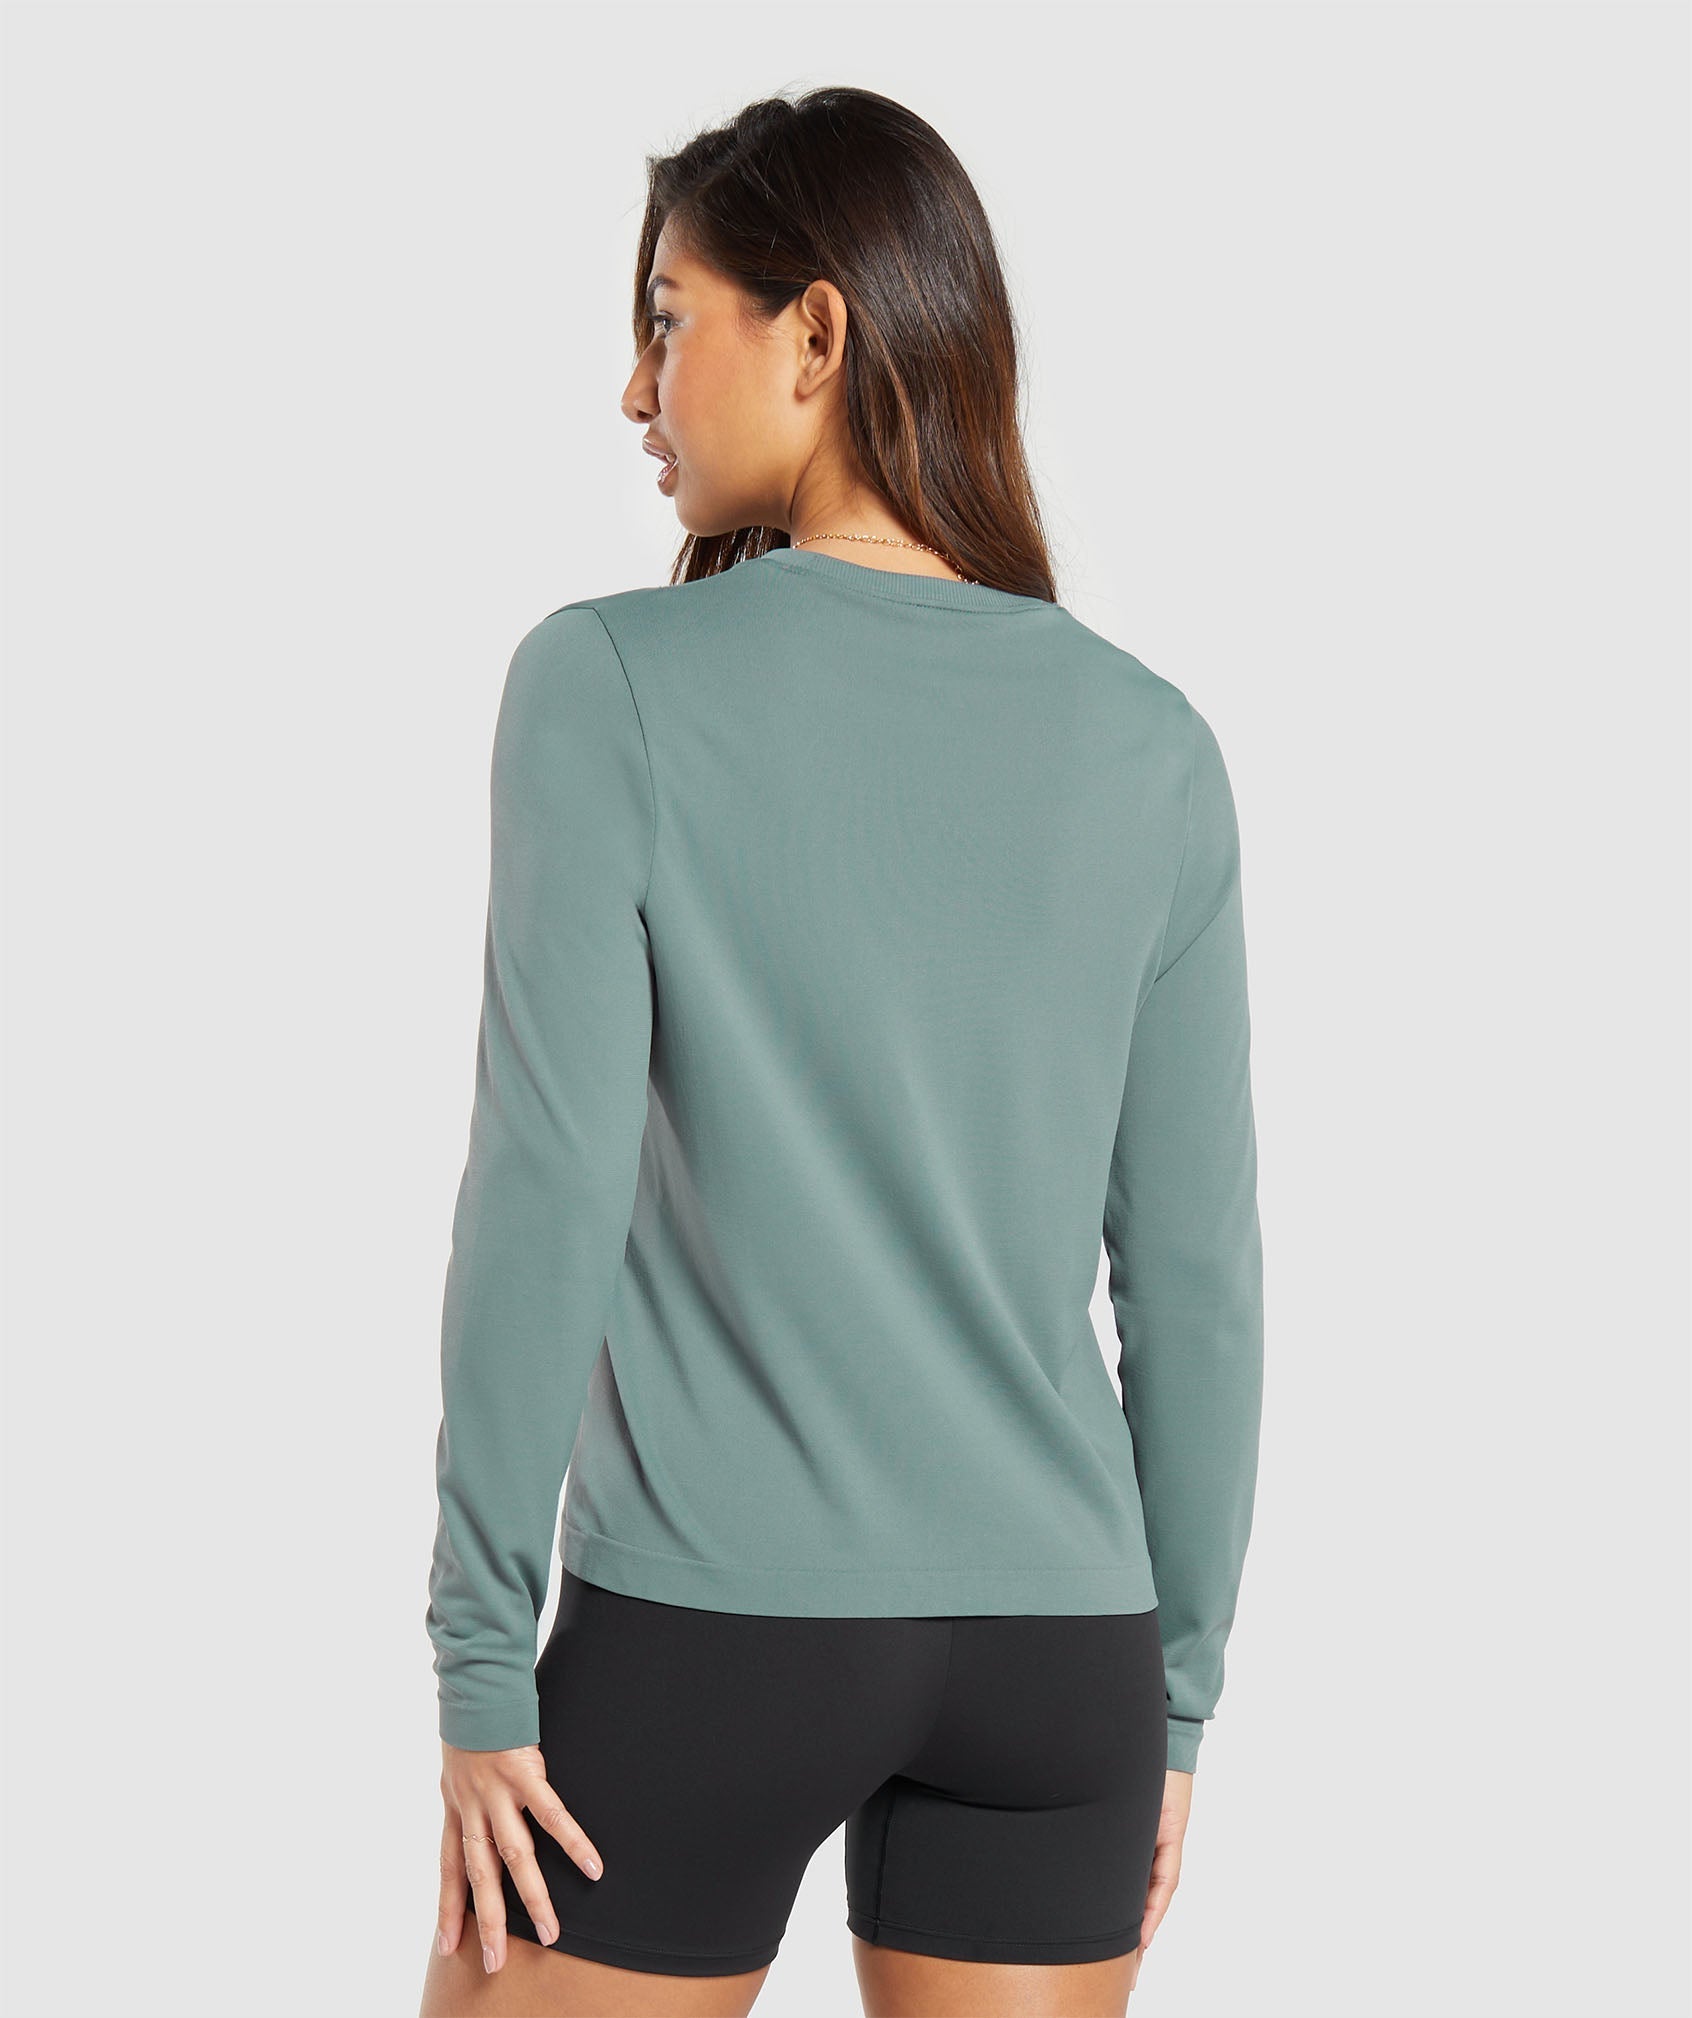 Everyday Seamless Long Sleeve Top in Cargo Teal - view 2